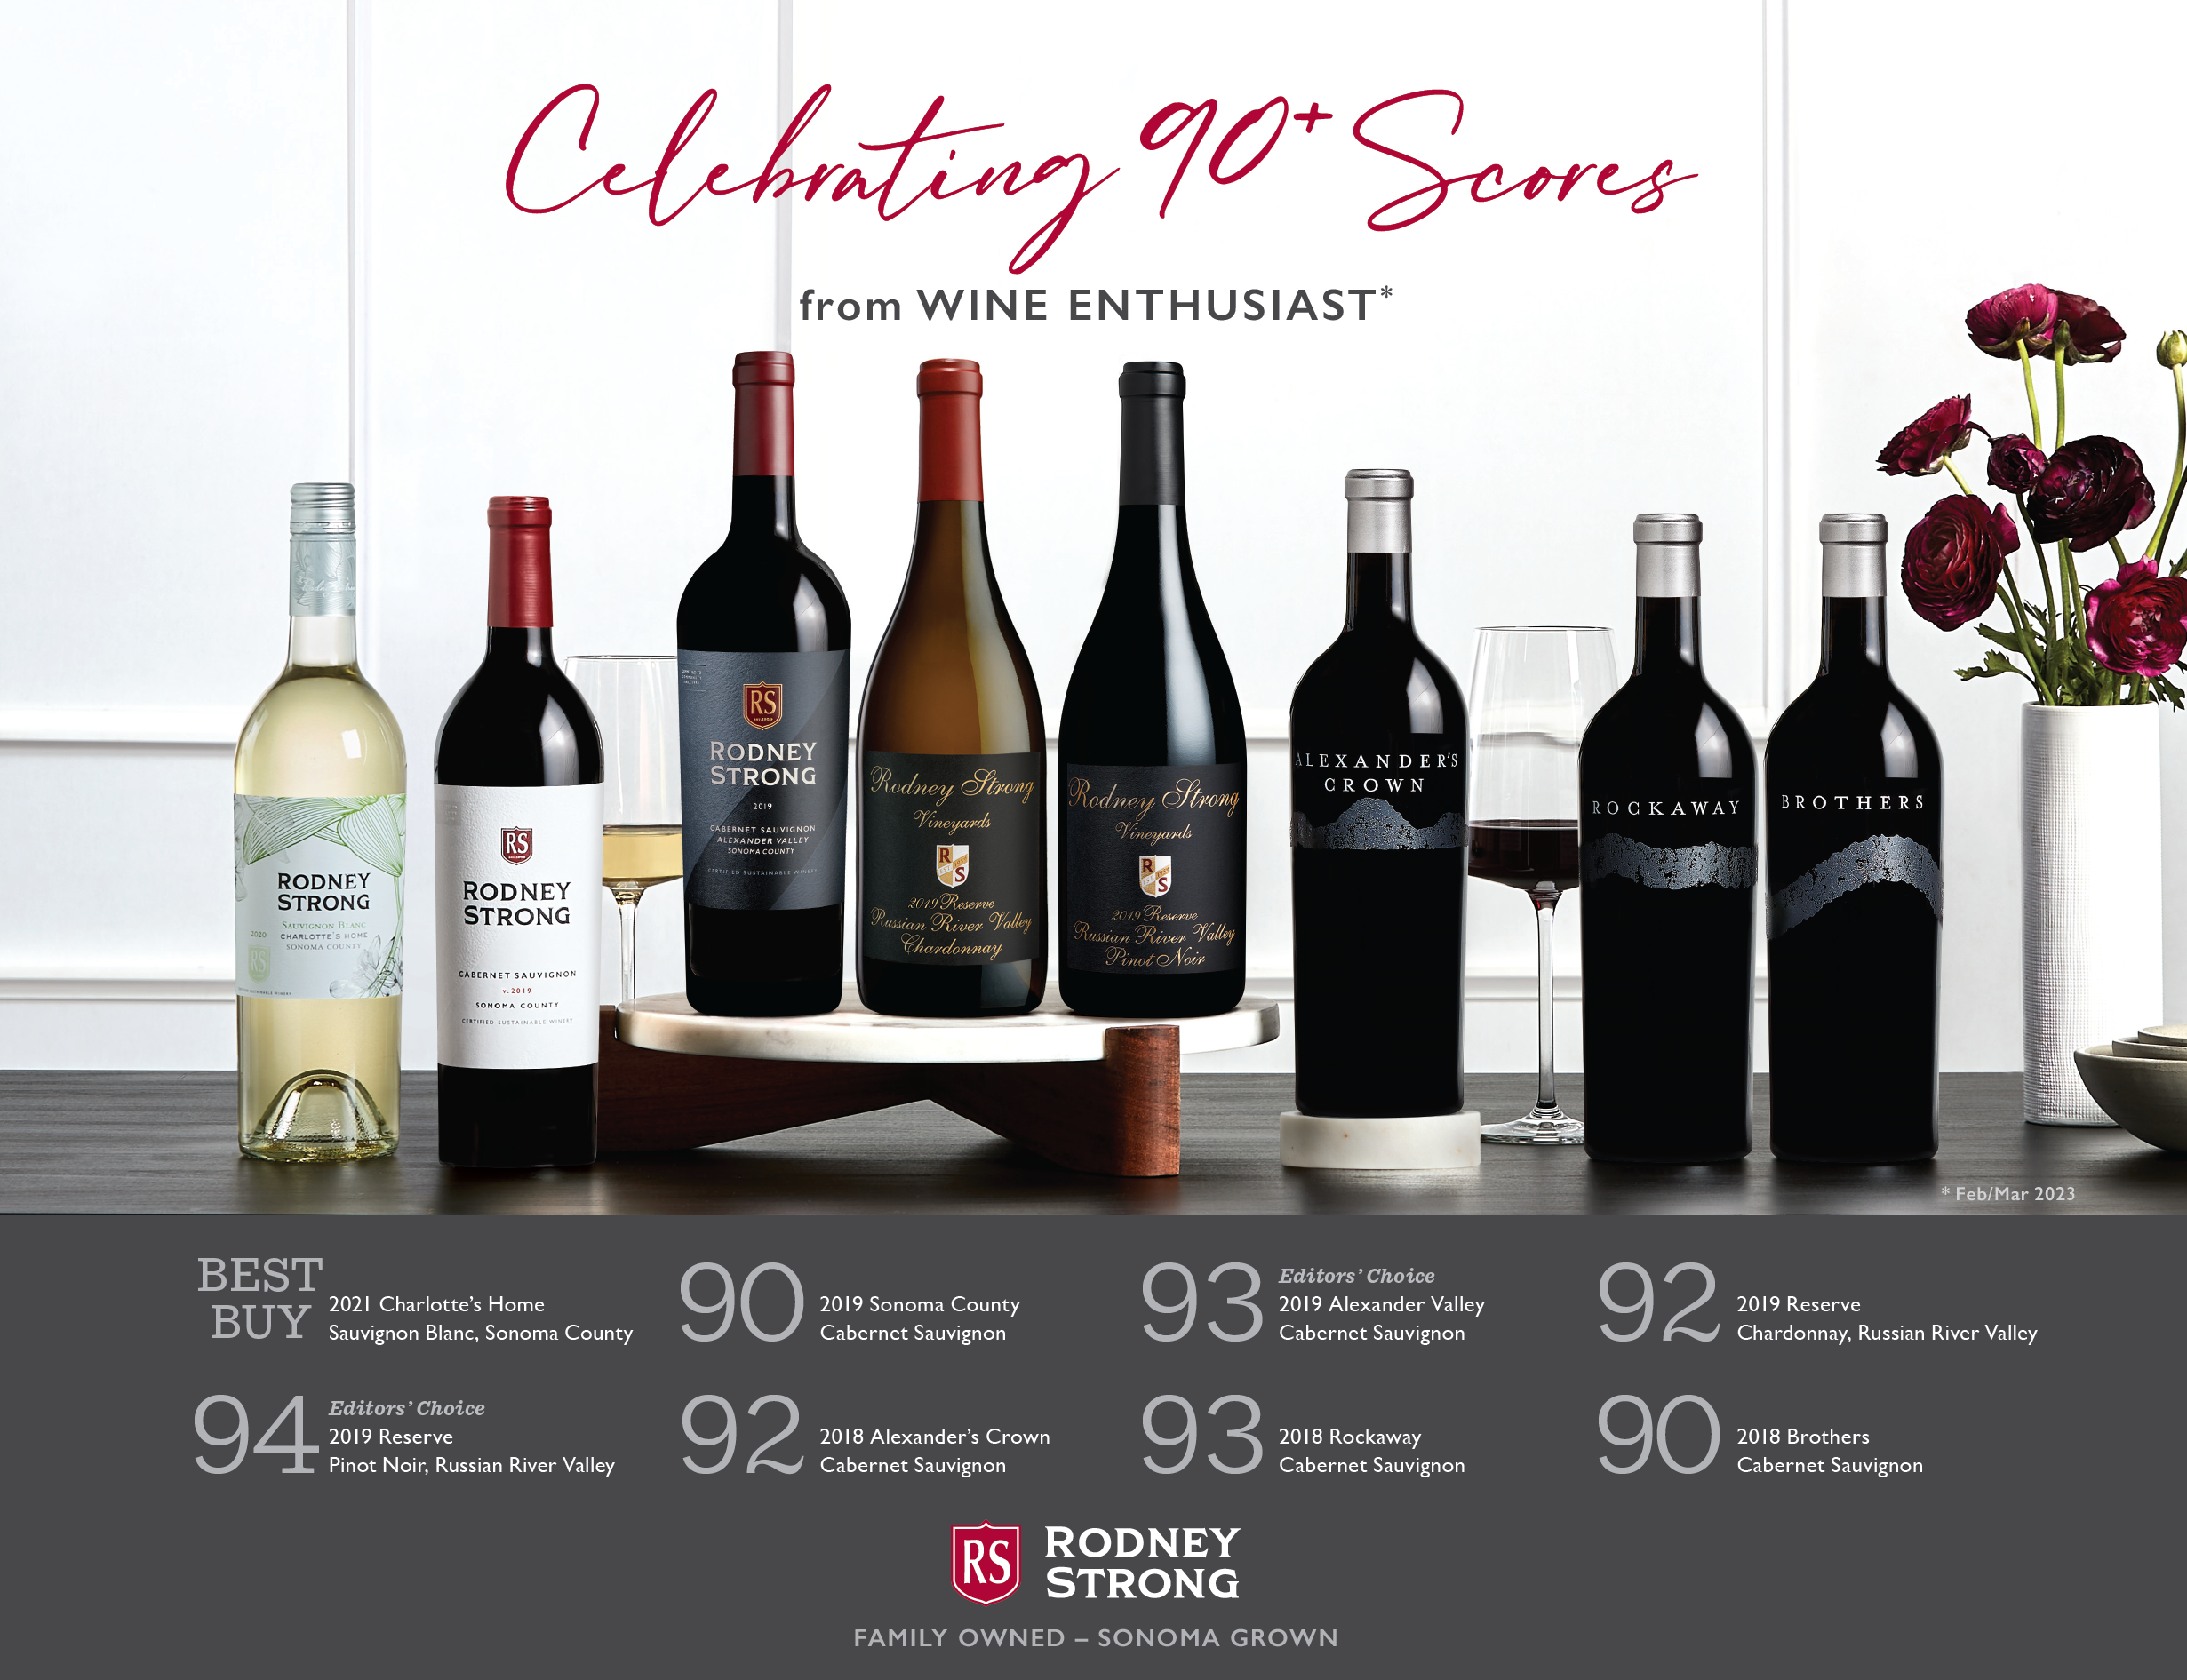 Wine Enthusiasts 90+ rated wines